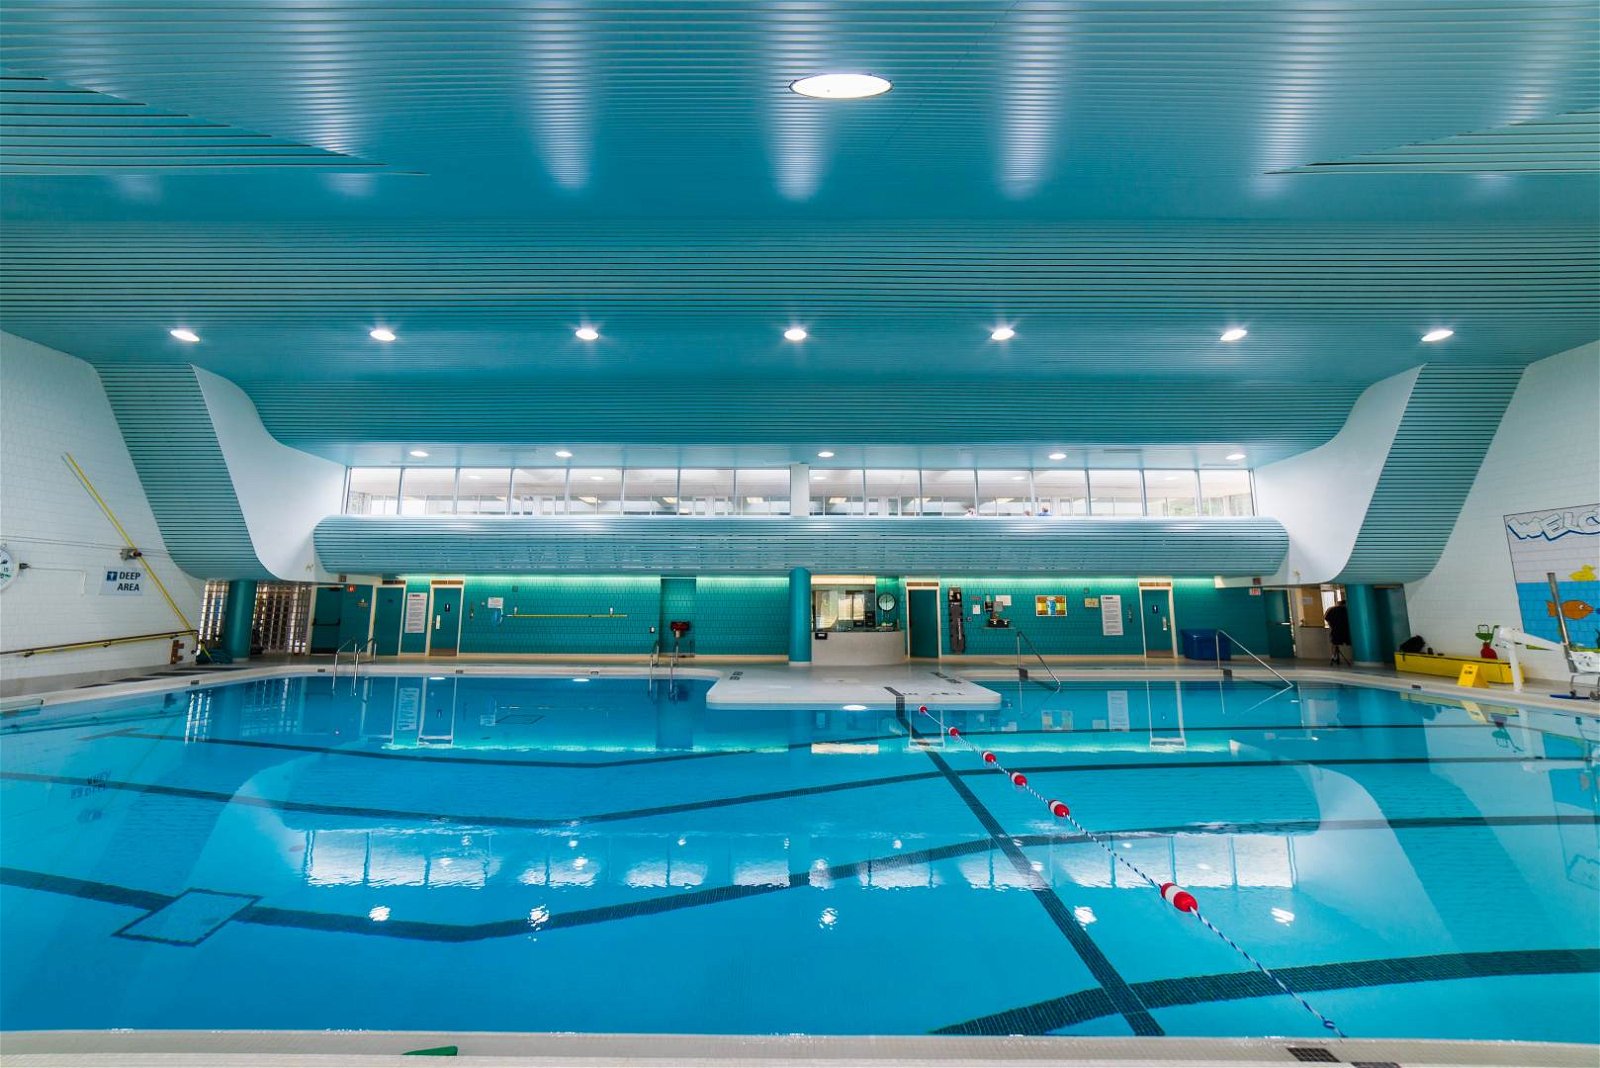 Wallace Emerson Pool and Community Centre